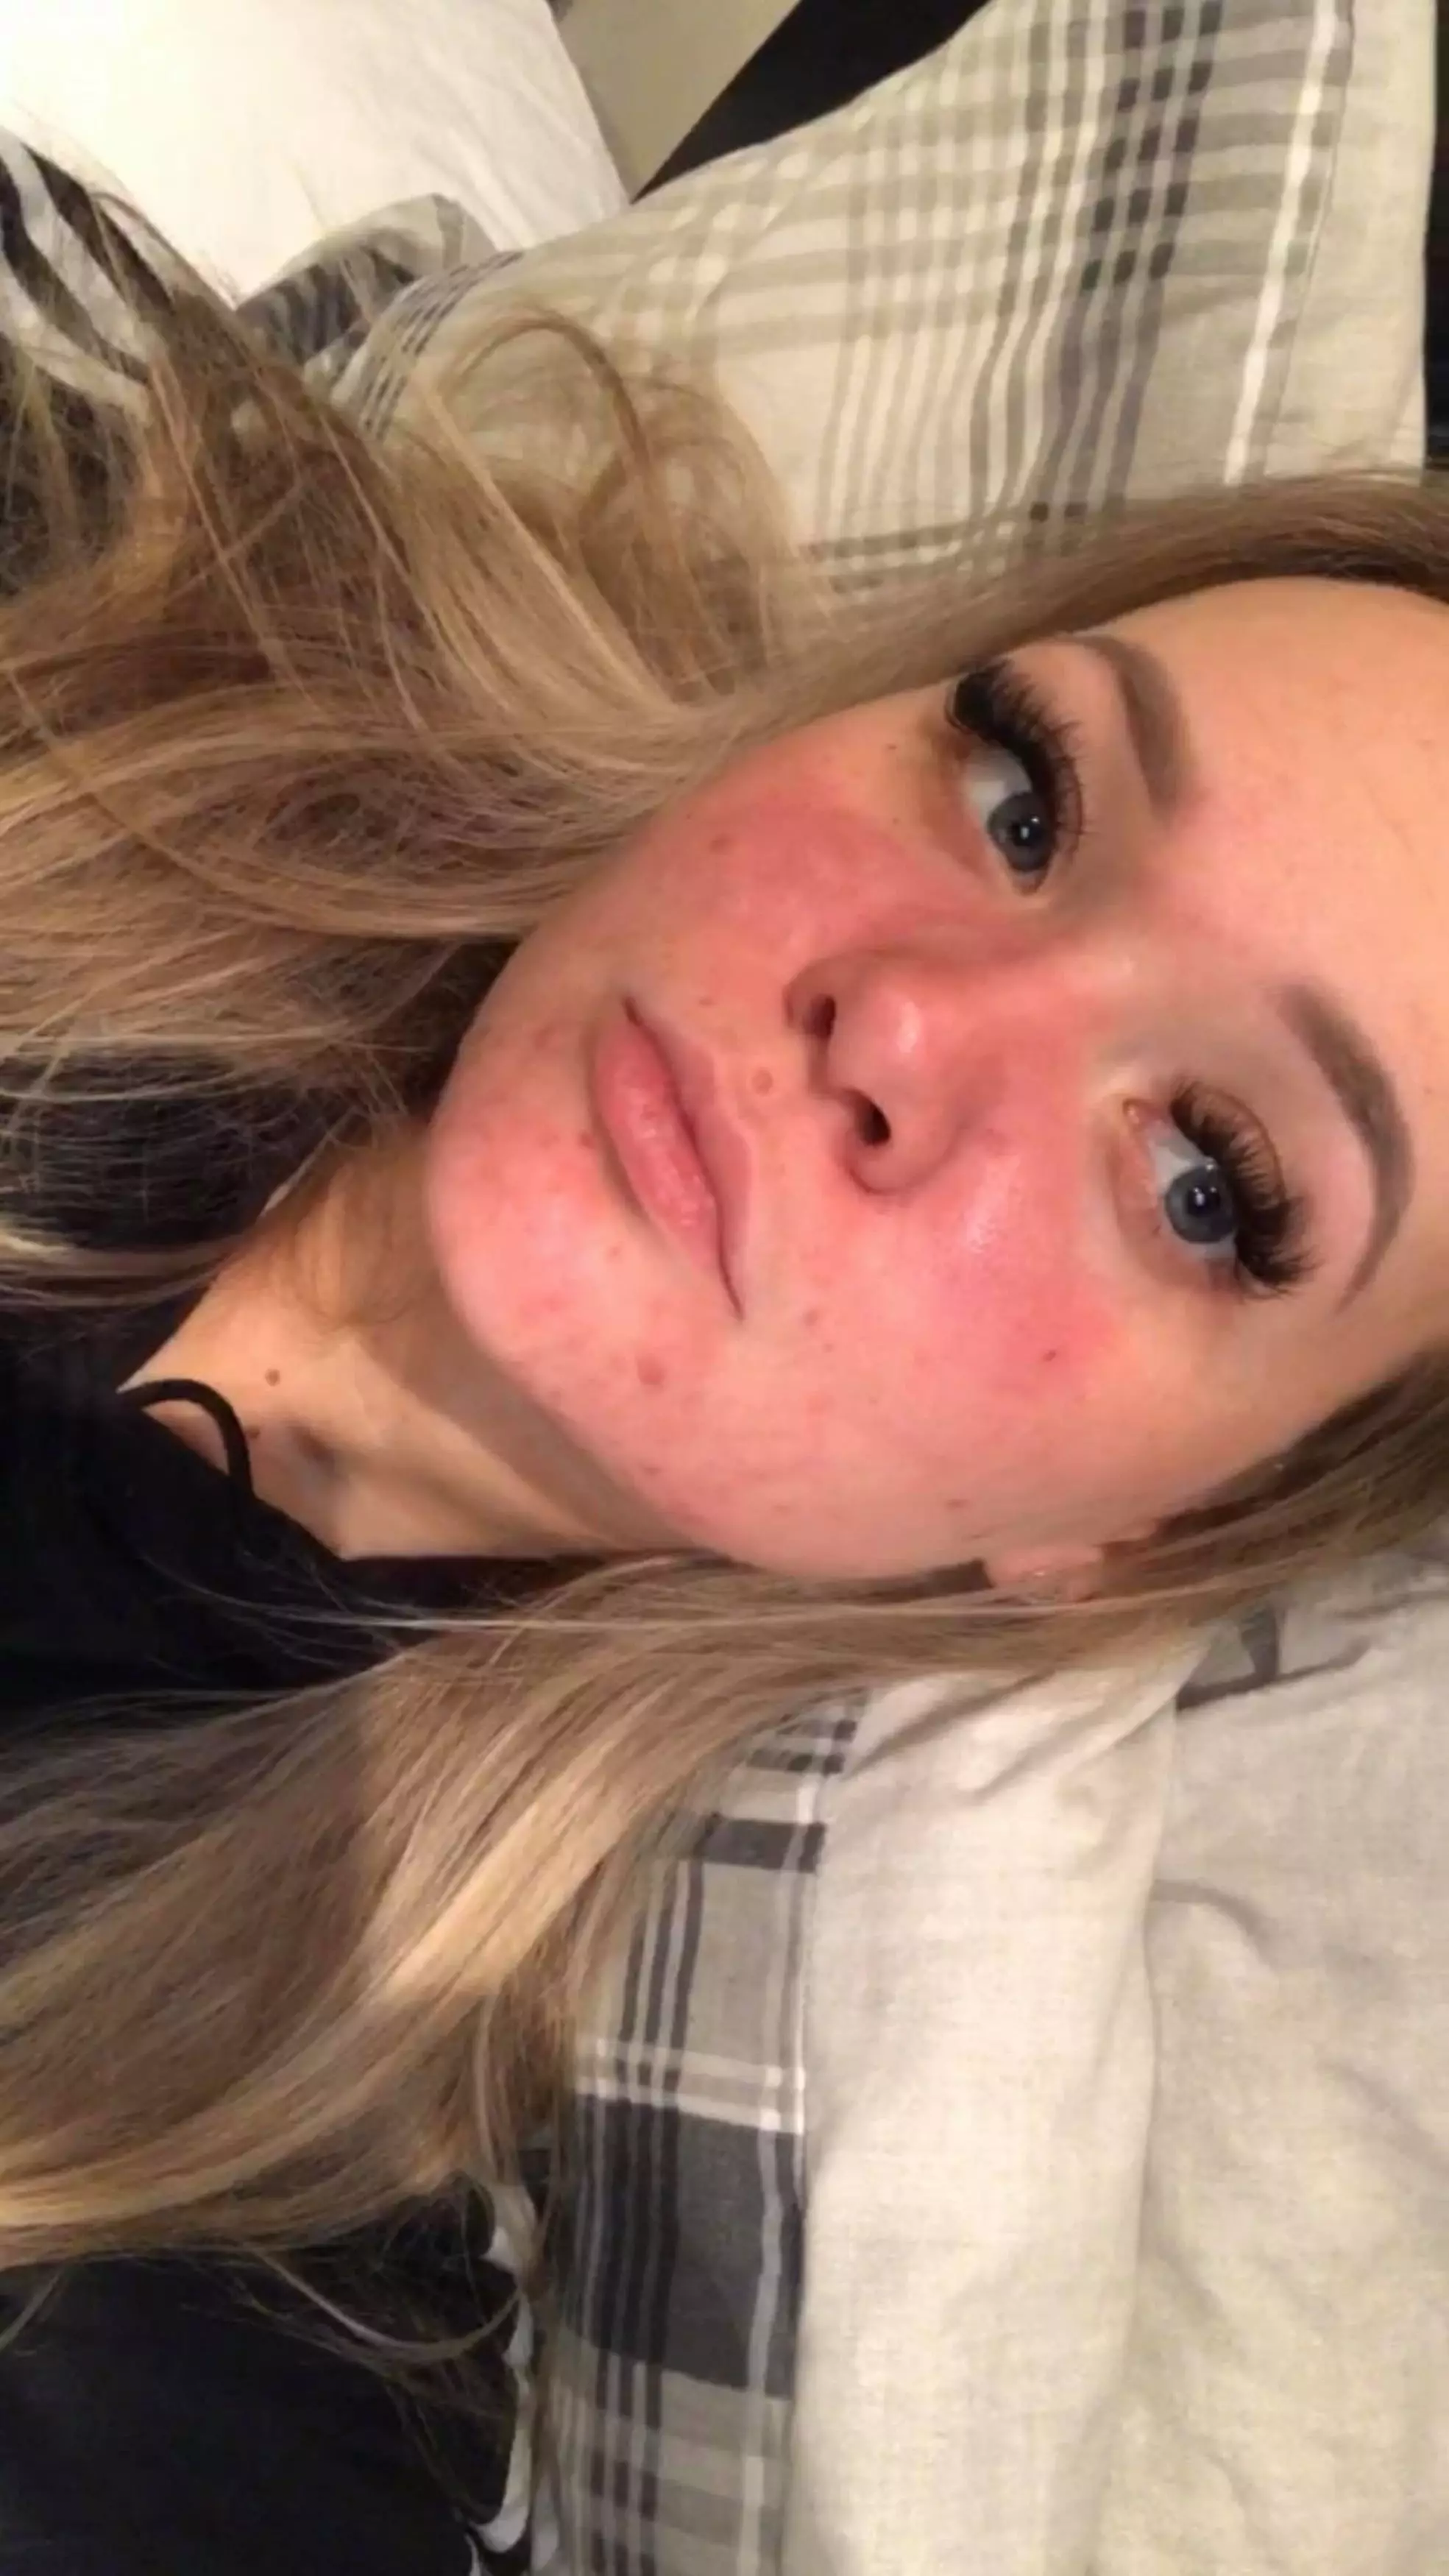 Ellie started a six month treatment on roaccutane in October 2019 (